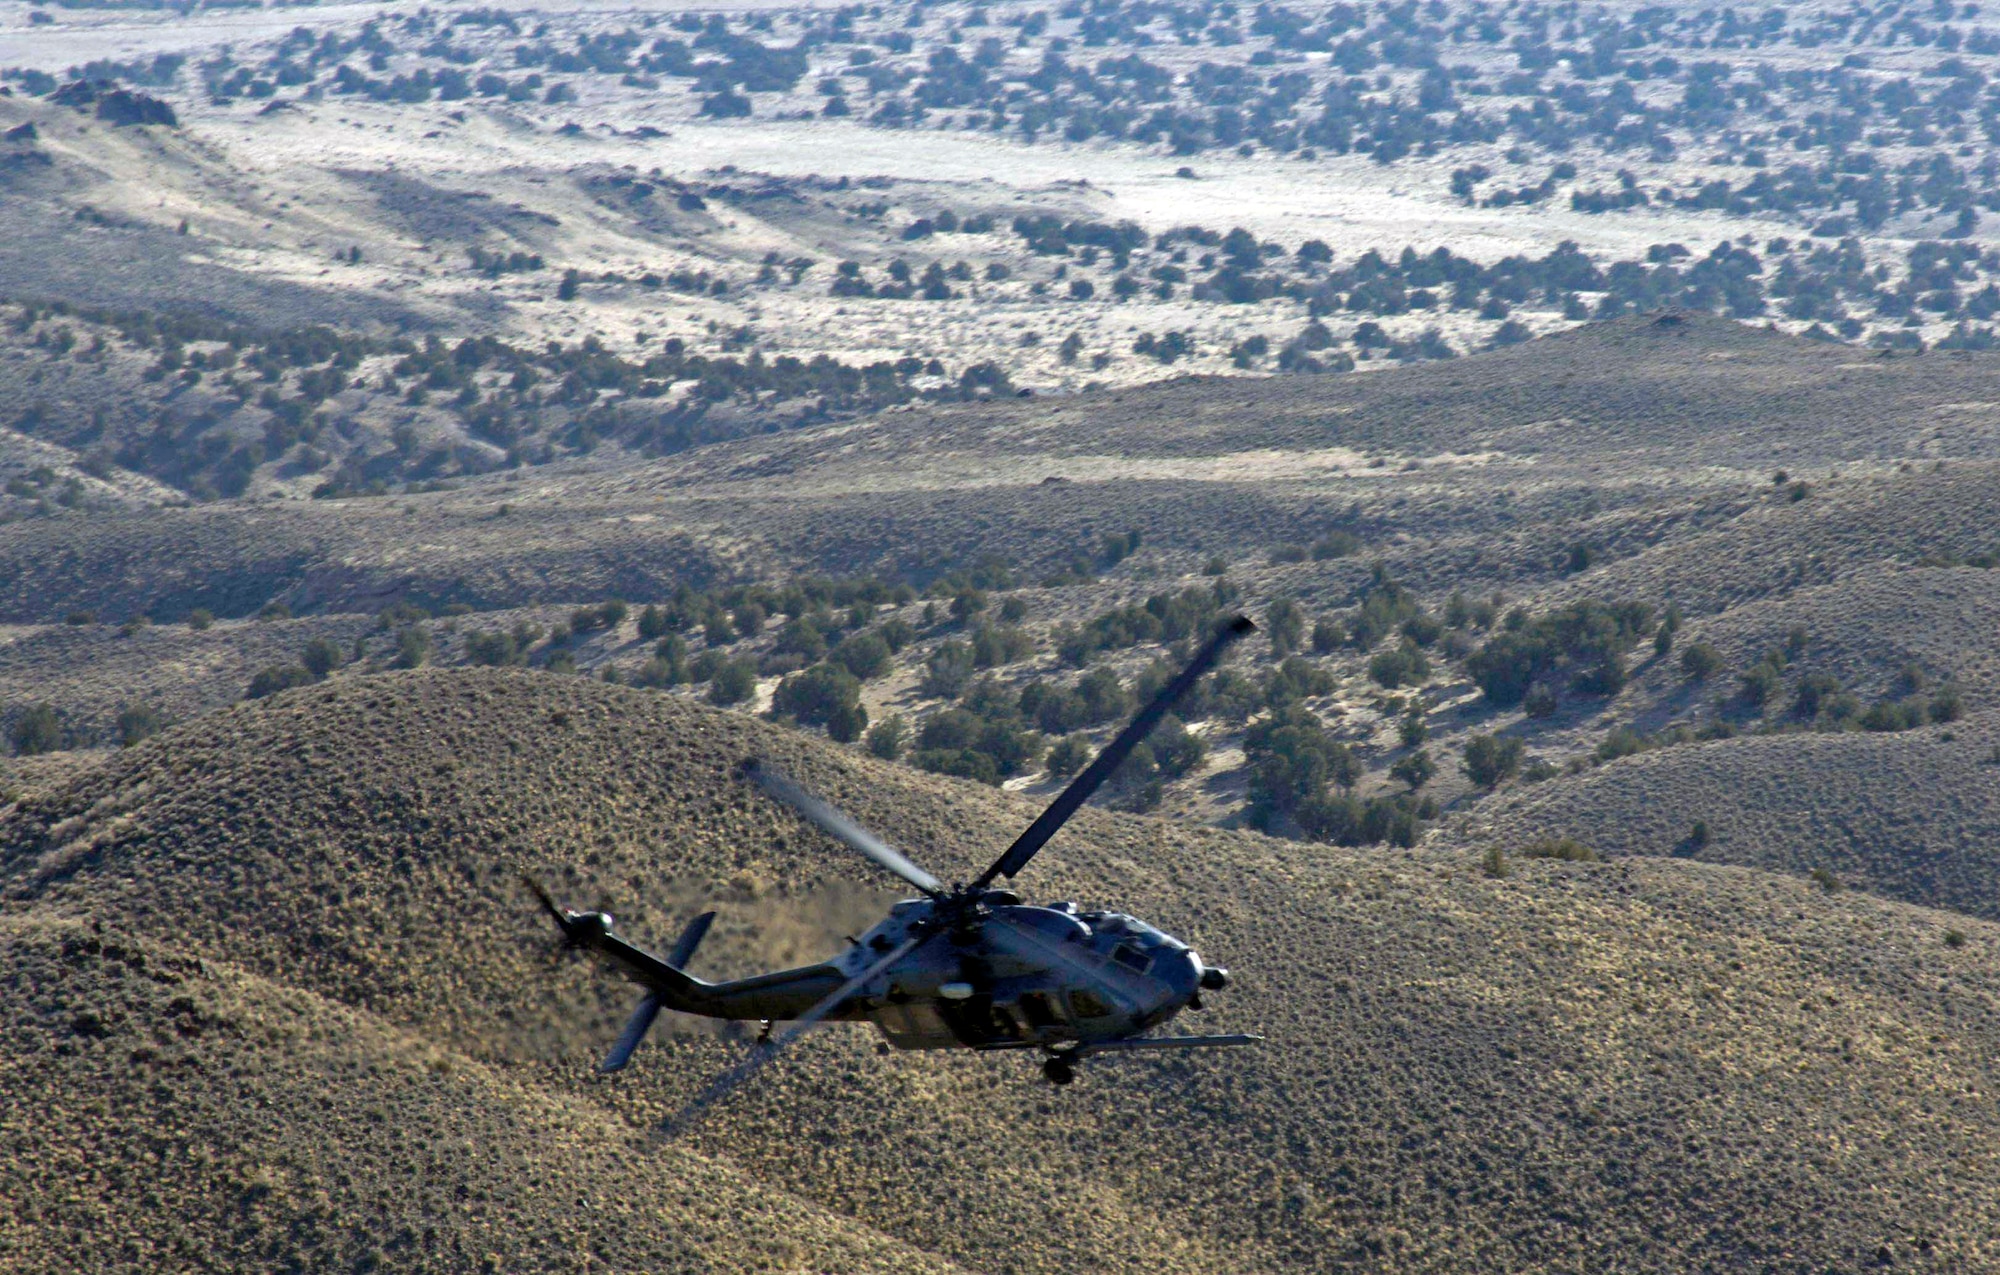 An HH-60 Pave Hawk manuevers over the Utah Test and Training Range during a combat search and rescue integration exercise Nov. 8 in Utah. The HH-60 is from Nellis Air Force Base, Nev. Members of the 34th Weapons Squadron from Nellis AFB led the search and recovery training. The exercise expanded the integration with Utah's 211th Aviation Group AH-64 Apache Joint Rotary Wing, 4th Fighter Squadron F-16 Fighting Falcon assets from Hill AFB, Utah, and special operations forces. Exercise participants also conducted extensive joint combat search and rescue operations against surface-to-air threats. The exercise is being run held Nov. 6 through 15. (U.S. Air Force photo/Master Sgt. Kevin J. Gruenwald) 
